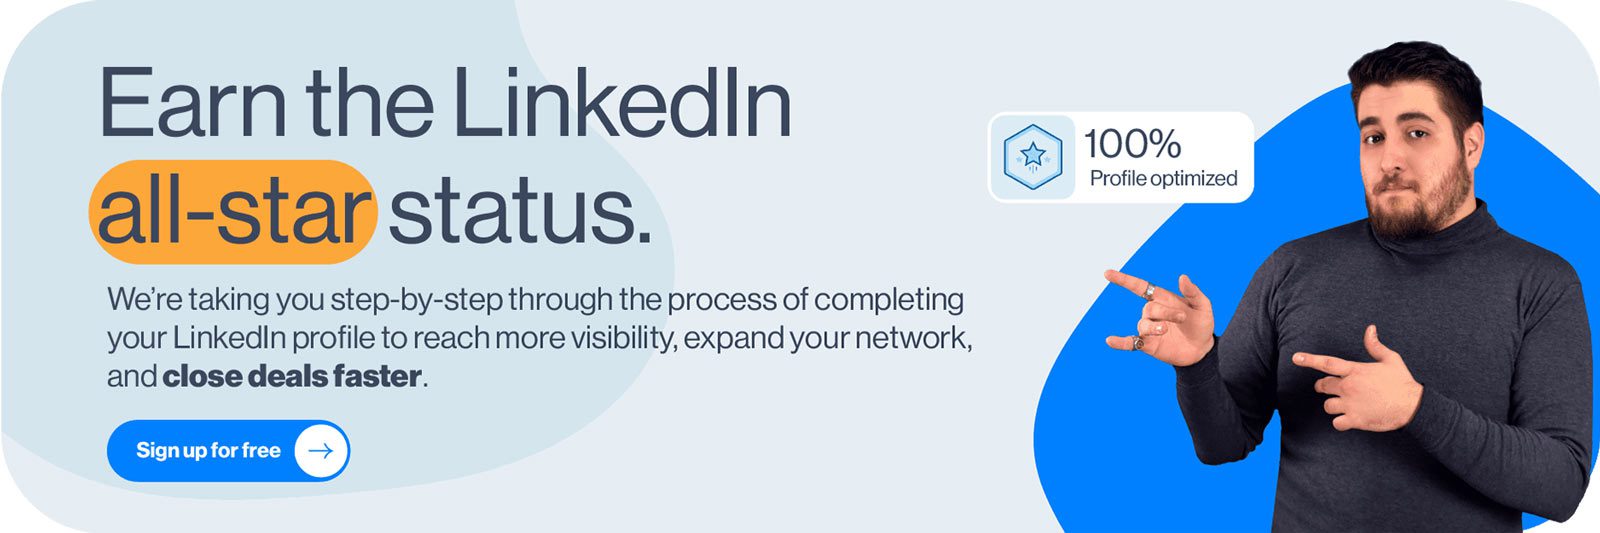 Set up your LinkedIn profile compete guide banner with text: Earn the LinkedIn all-star status